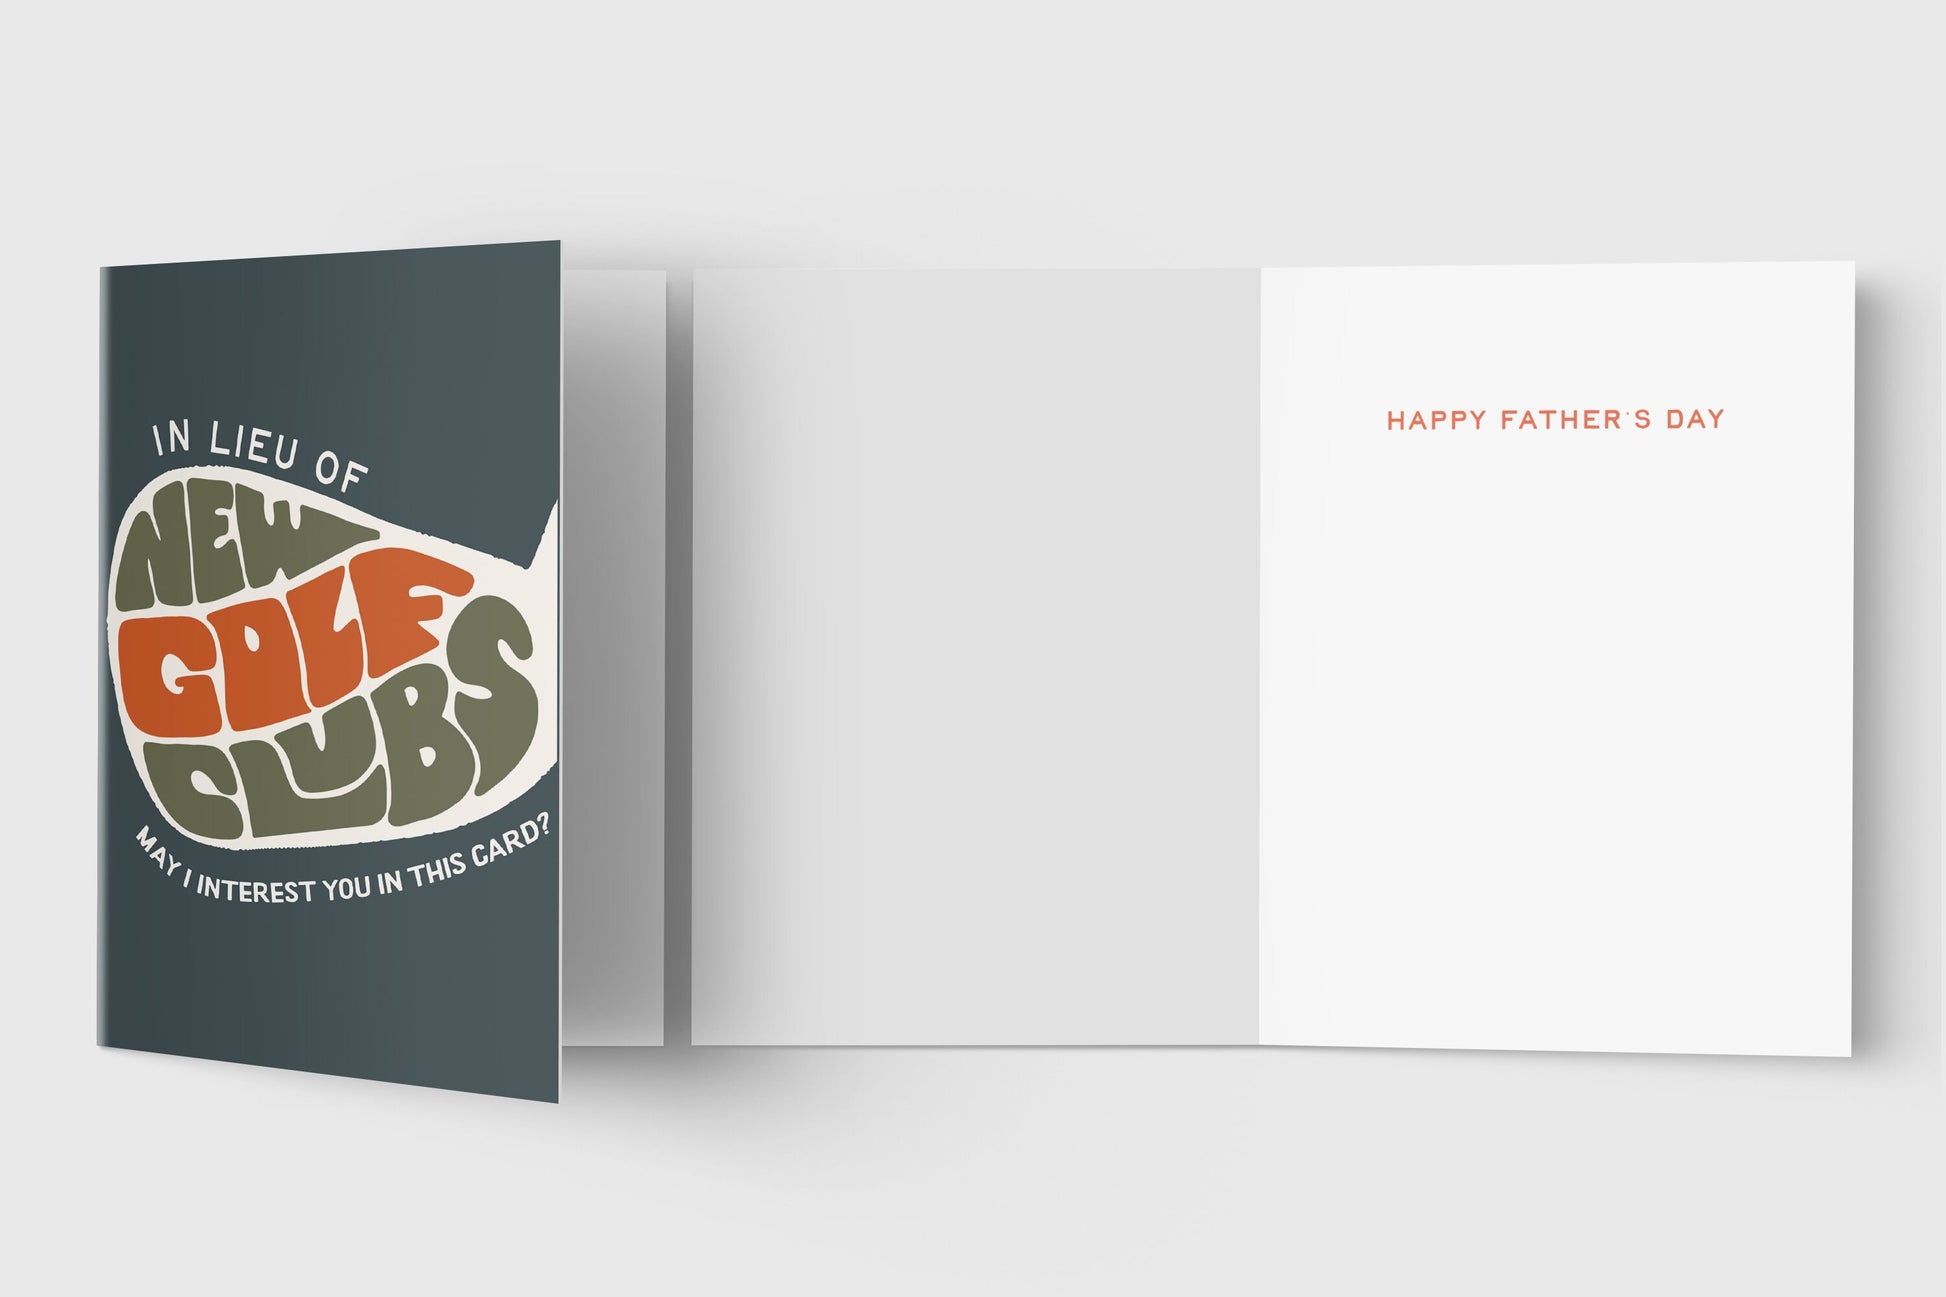 Father's Day Card | Golf Clubs - Father Figure - For Dad - Wishing You a Happy Father's Day - Father's Day Gift Idea - Funny Card - Unique